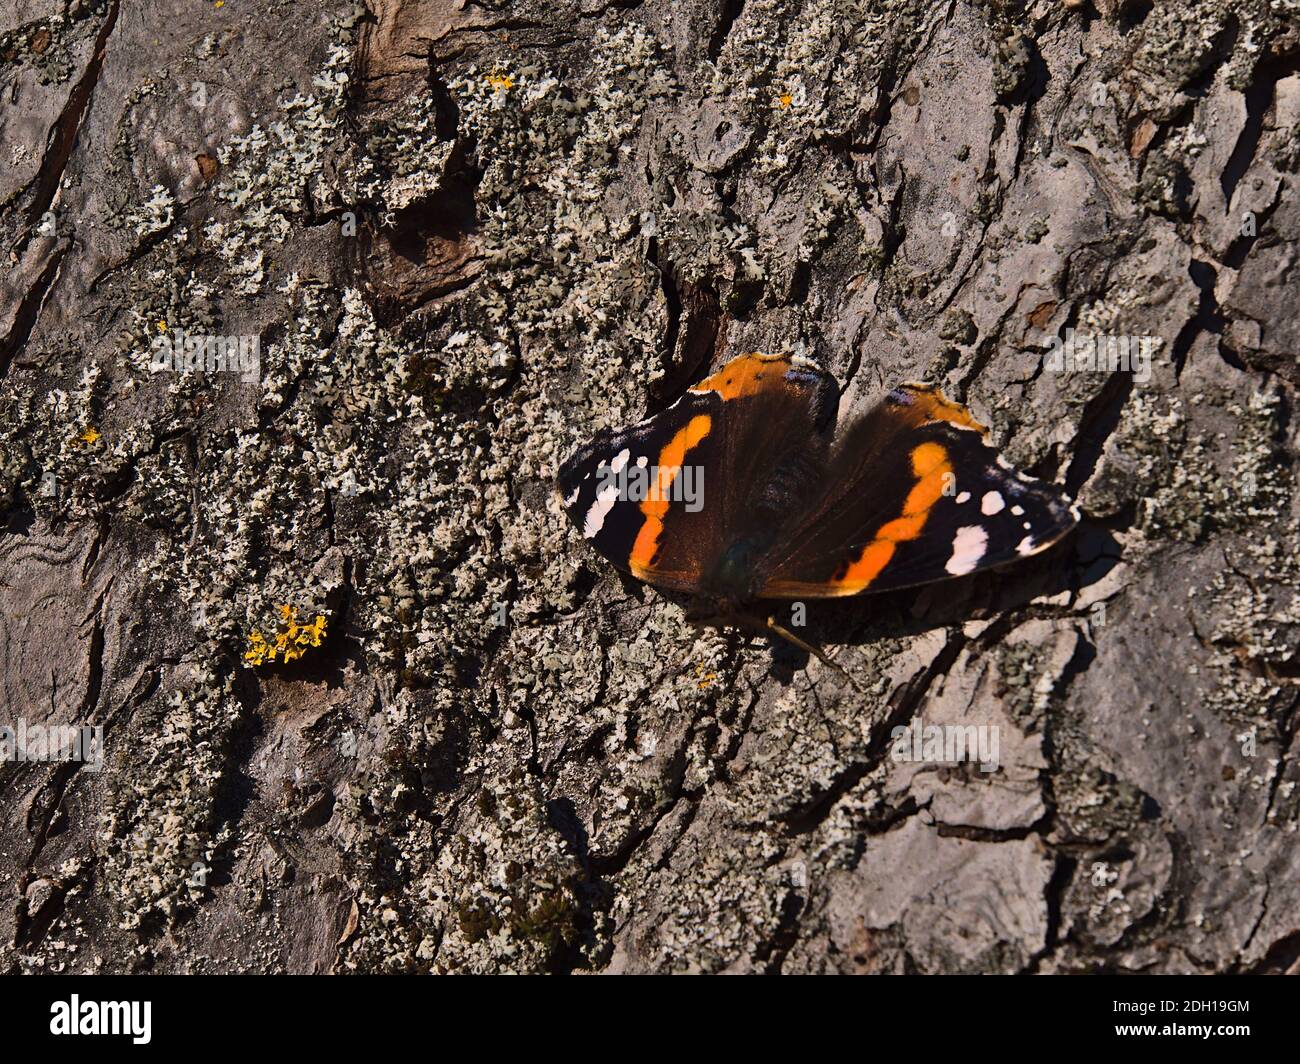 Closeup view of beautiful butterfly vanessa atalanta (red admiral) with black wings, red bands and white spots warming up on bark of tree. Stock Photo